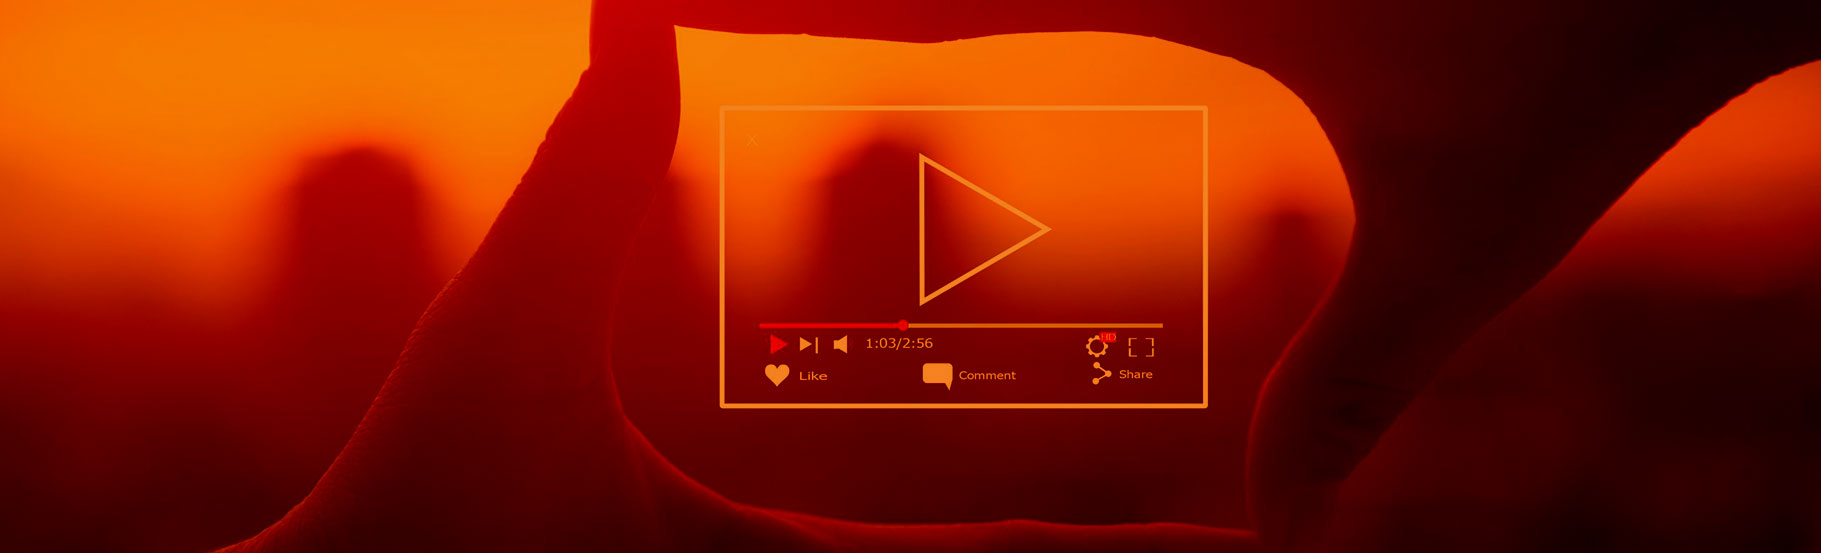 Short videos: 5 trends marketers need to pay attention to